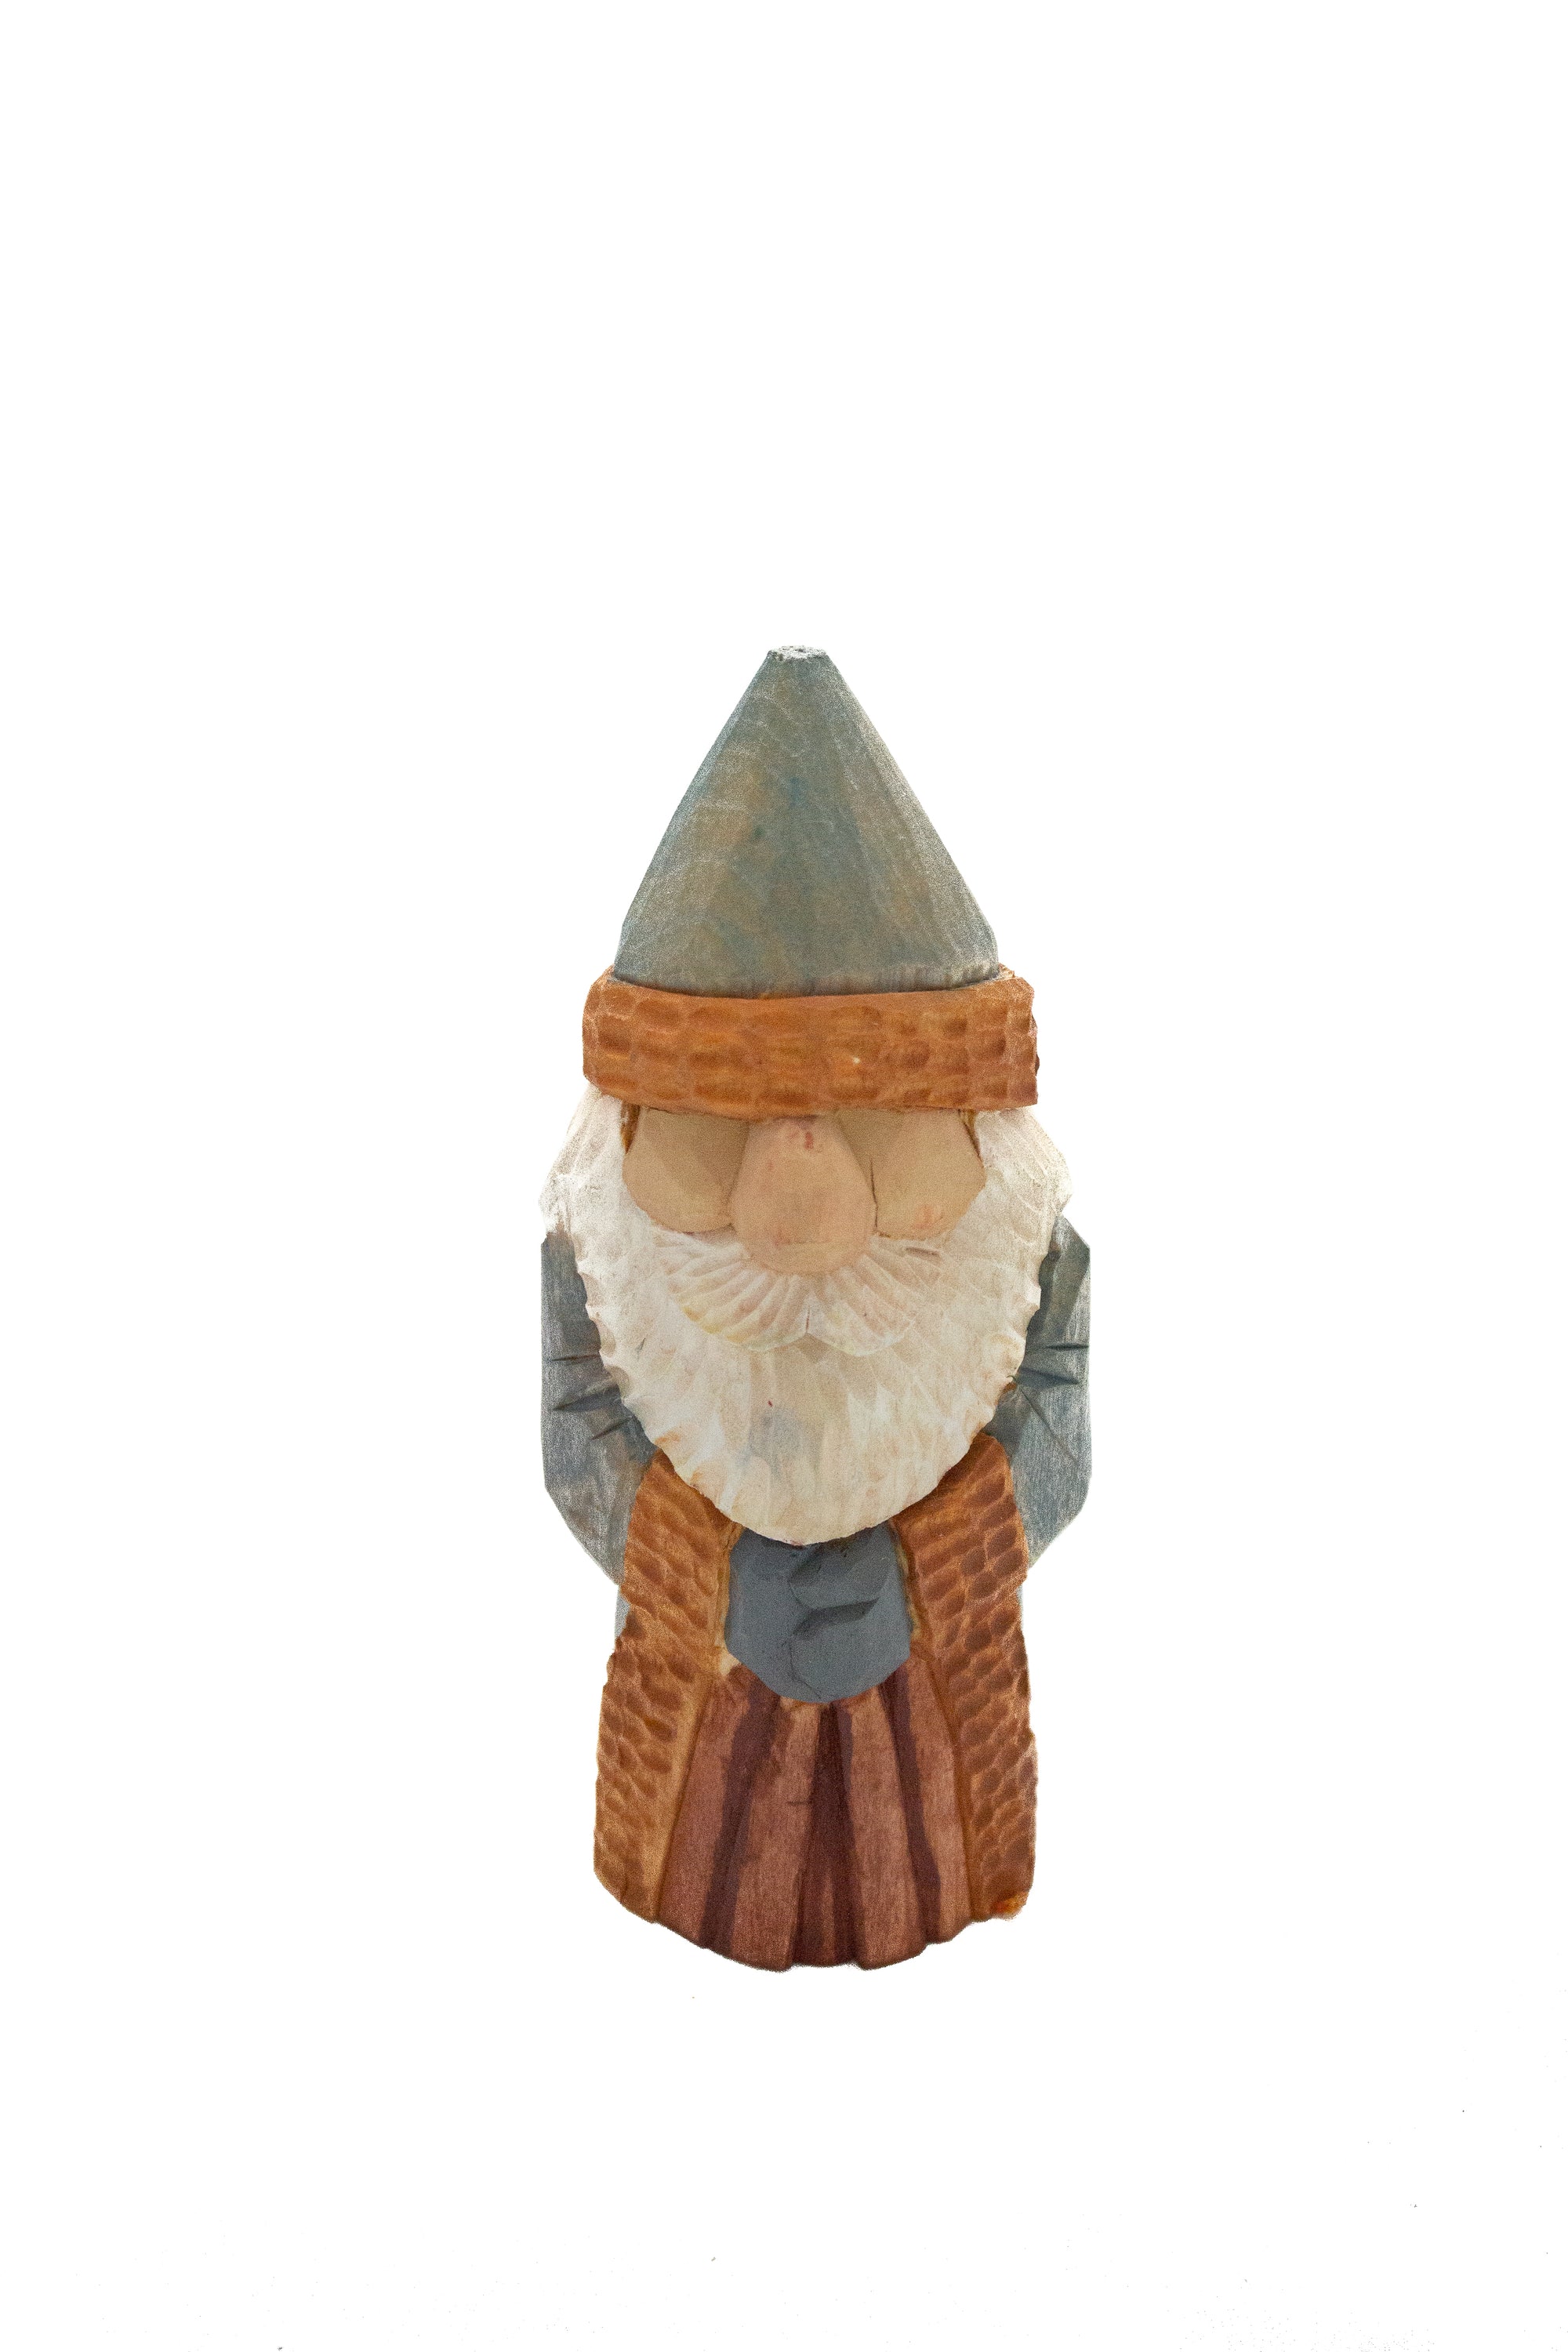 Wood Carved Gnomes